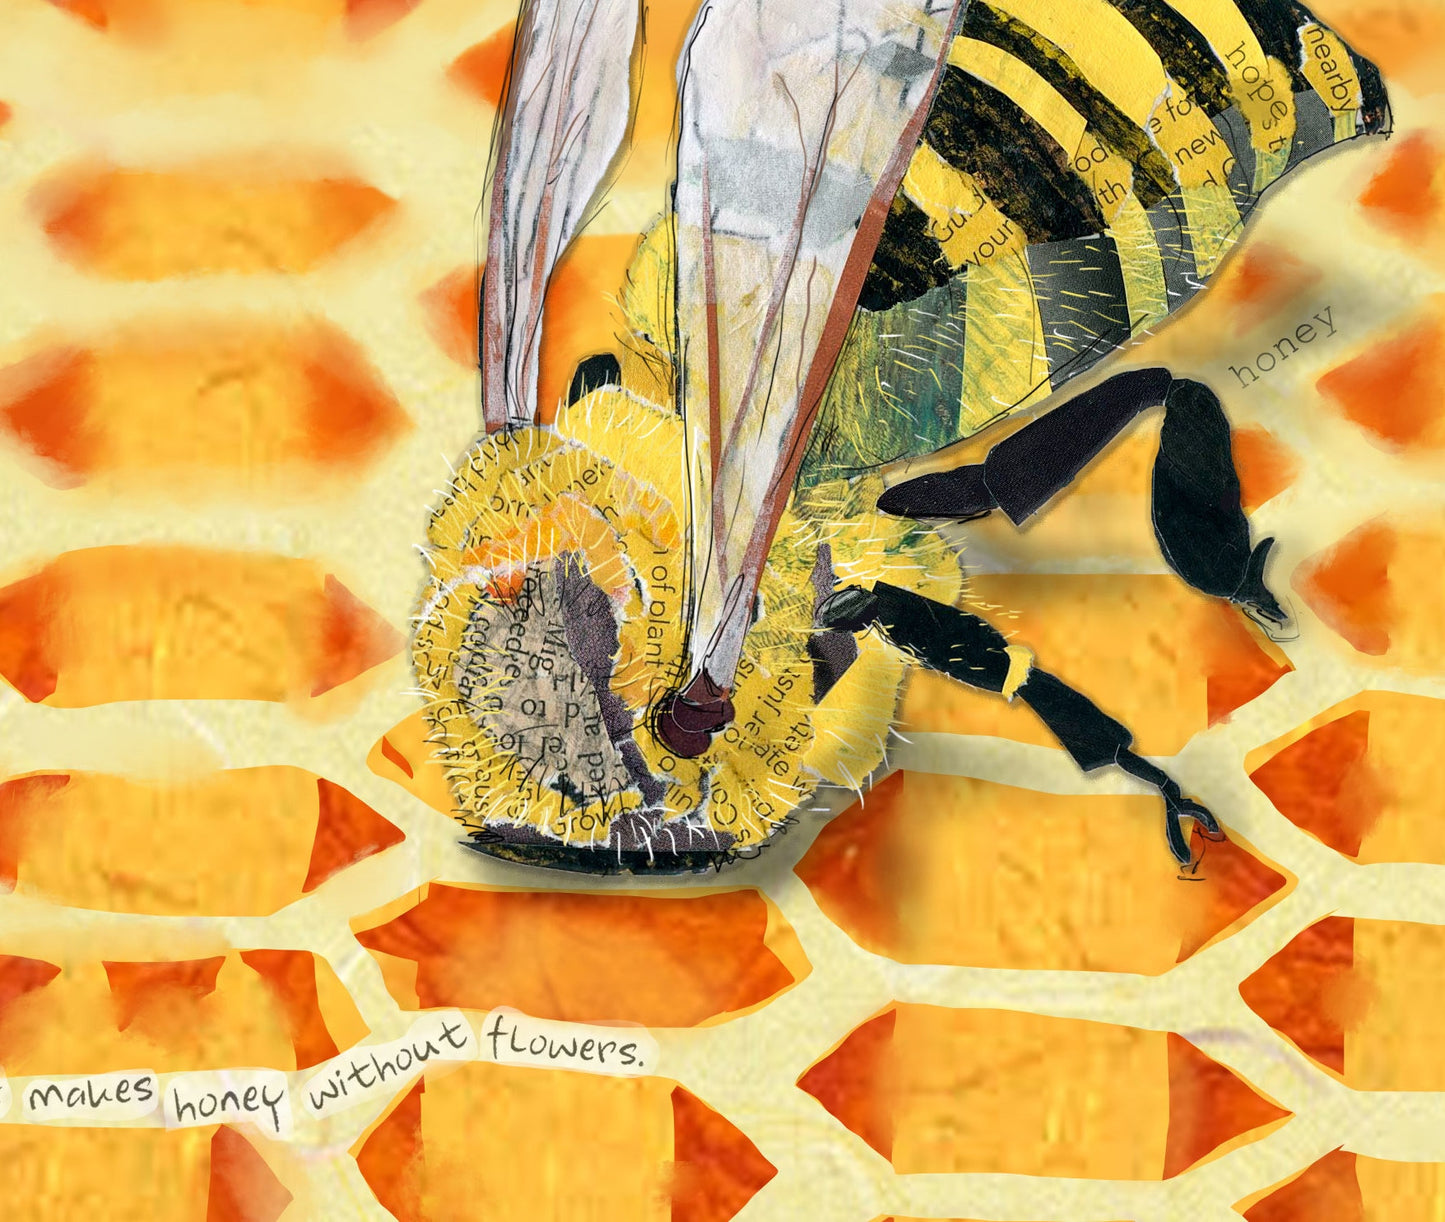 8x10 Art Print of a mixed media collage of a honeybee with its head deep inside a honey comb cell, inspirational quote, hope